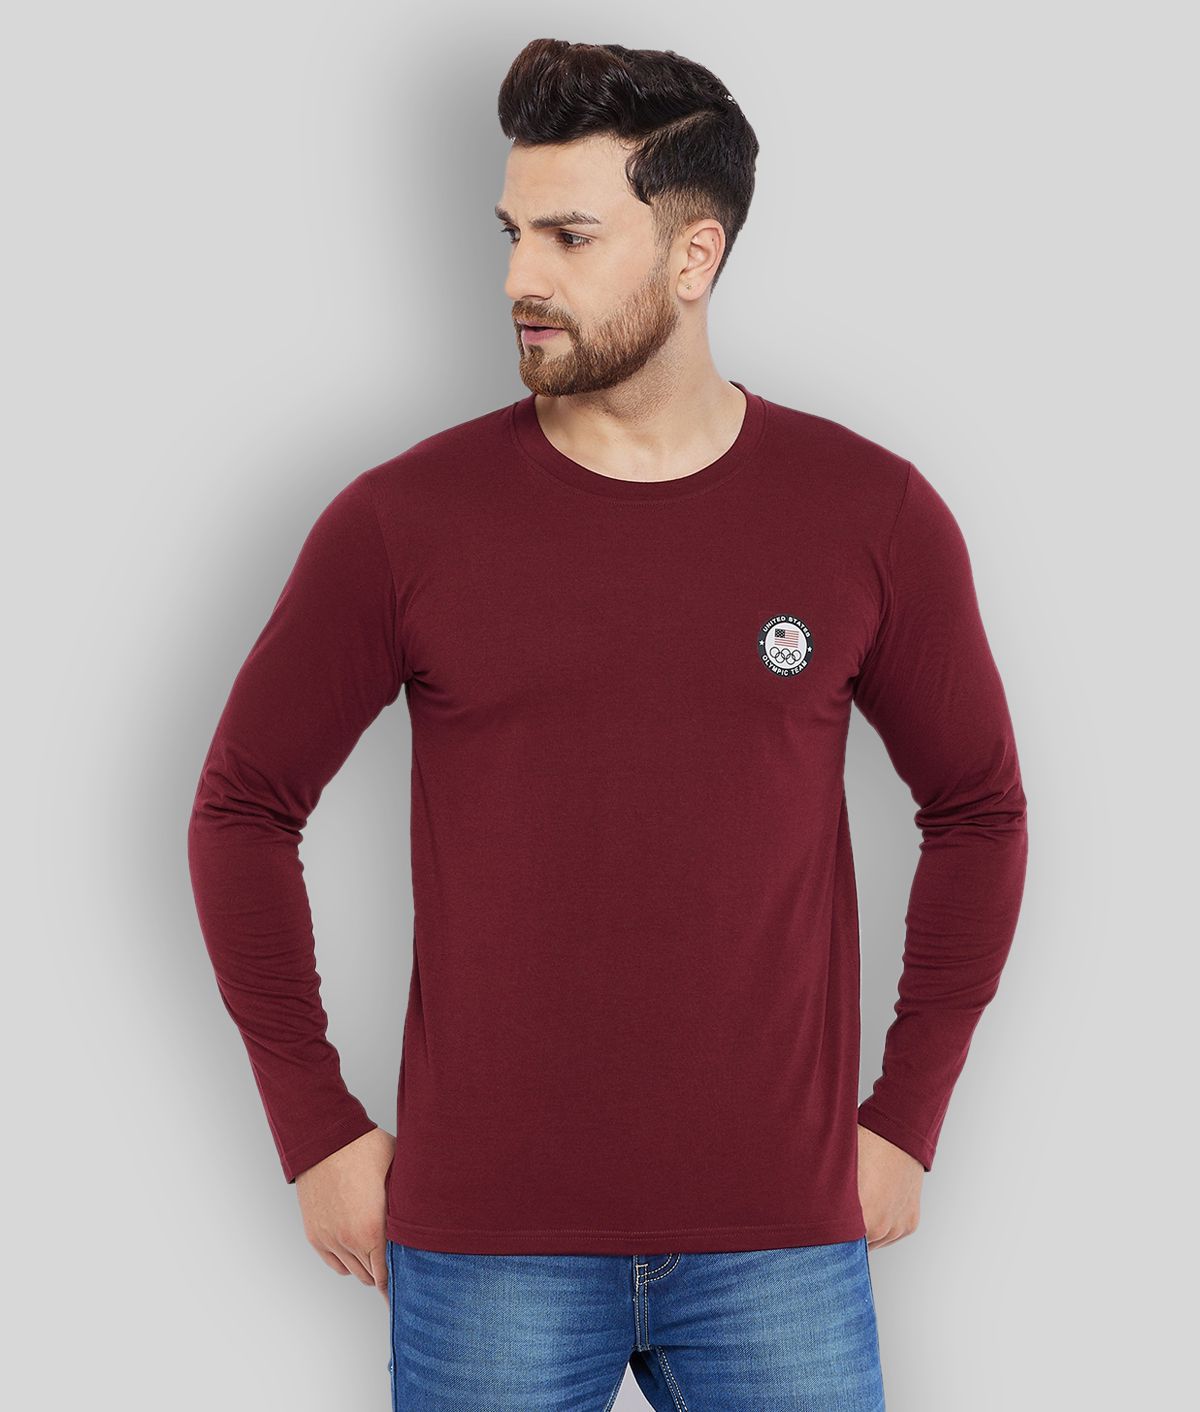     			The Million Club - Maroon Polyester Regular Fit Men's T-Shirt ( Pack of 1 )